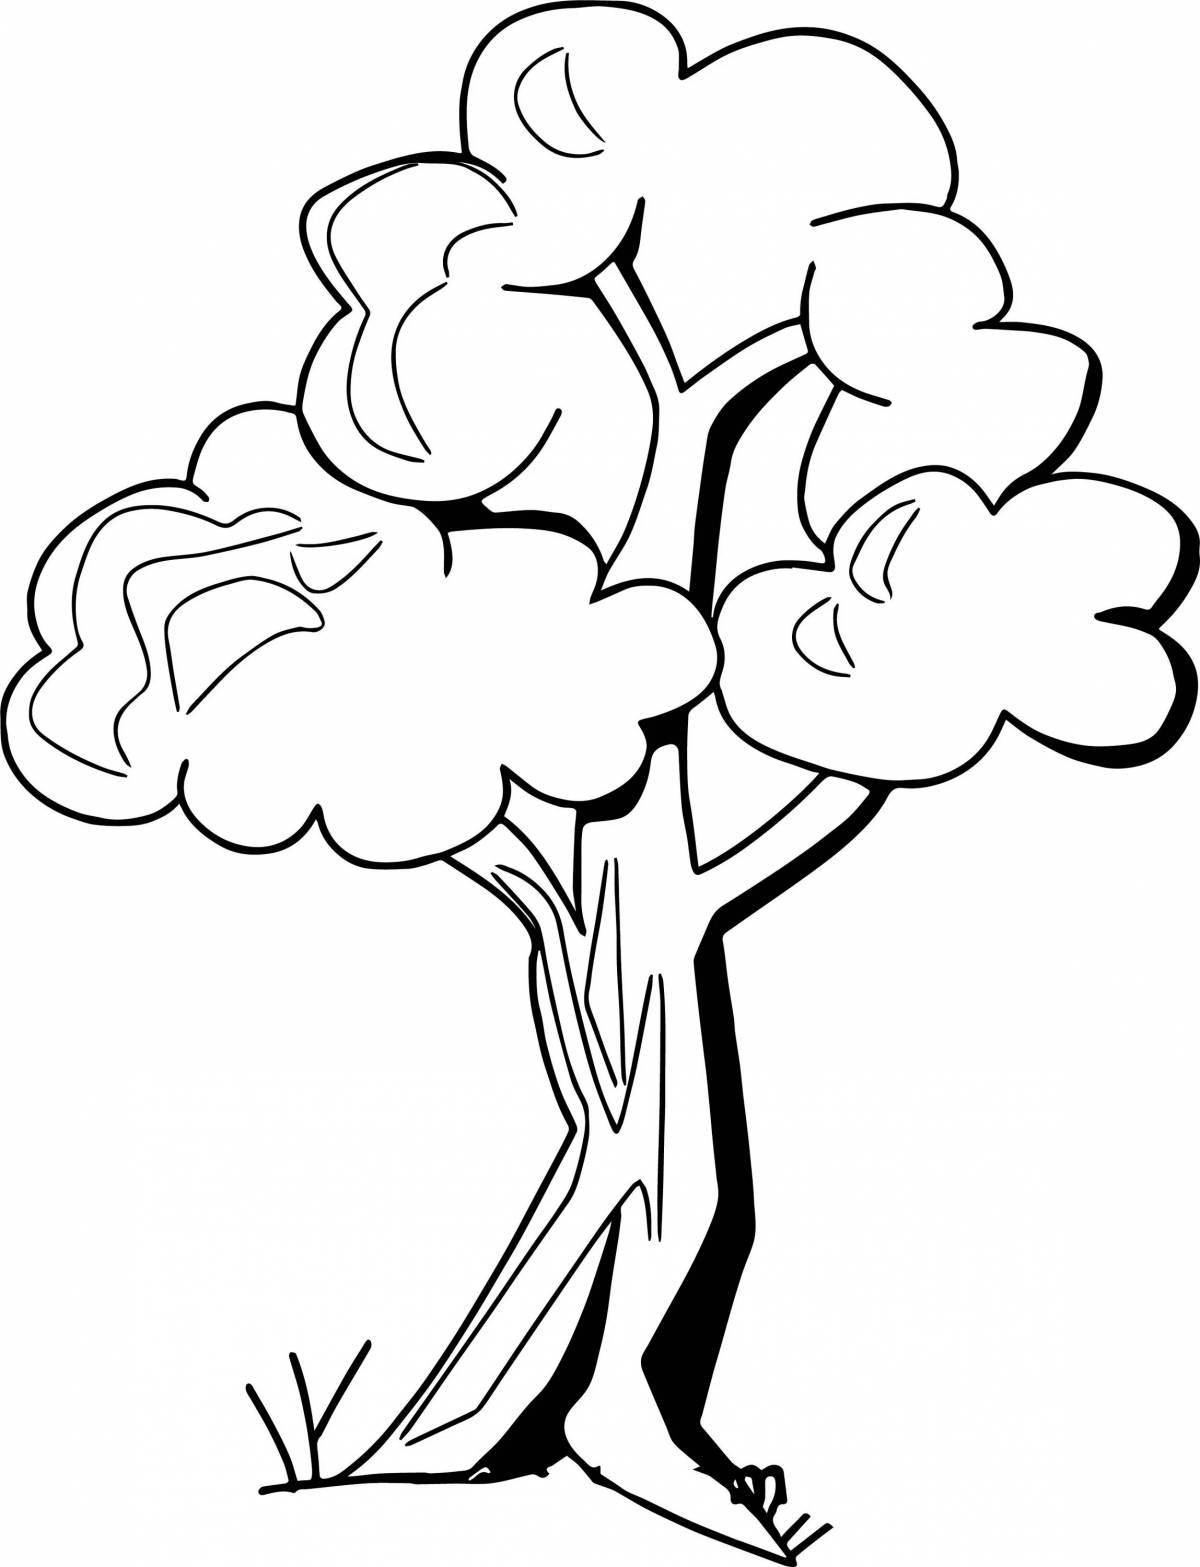 Coloring tree for children